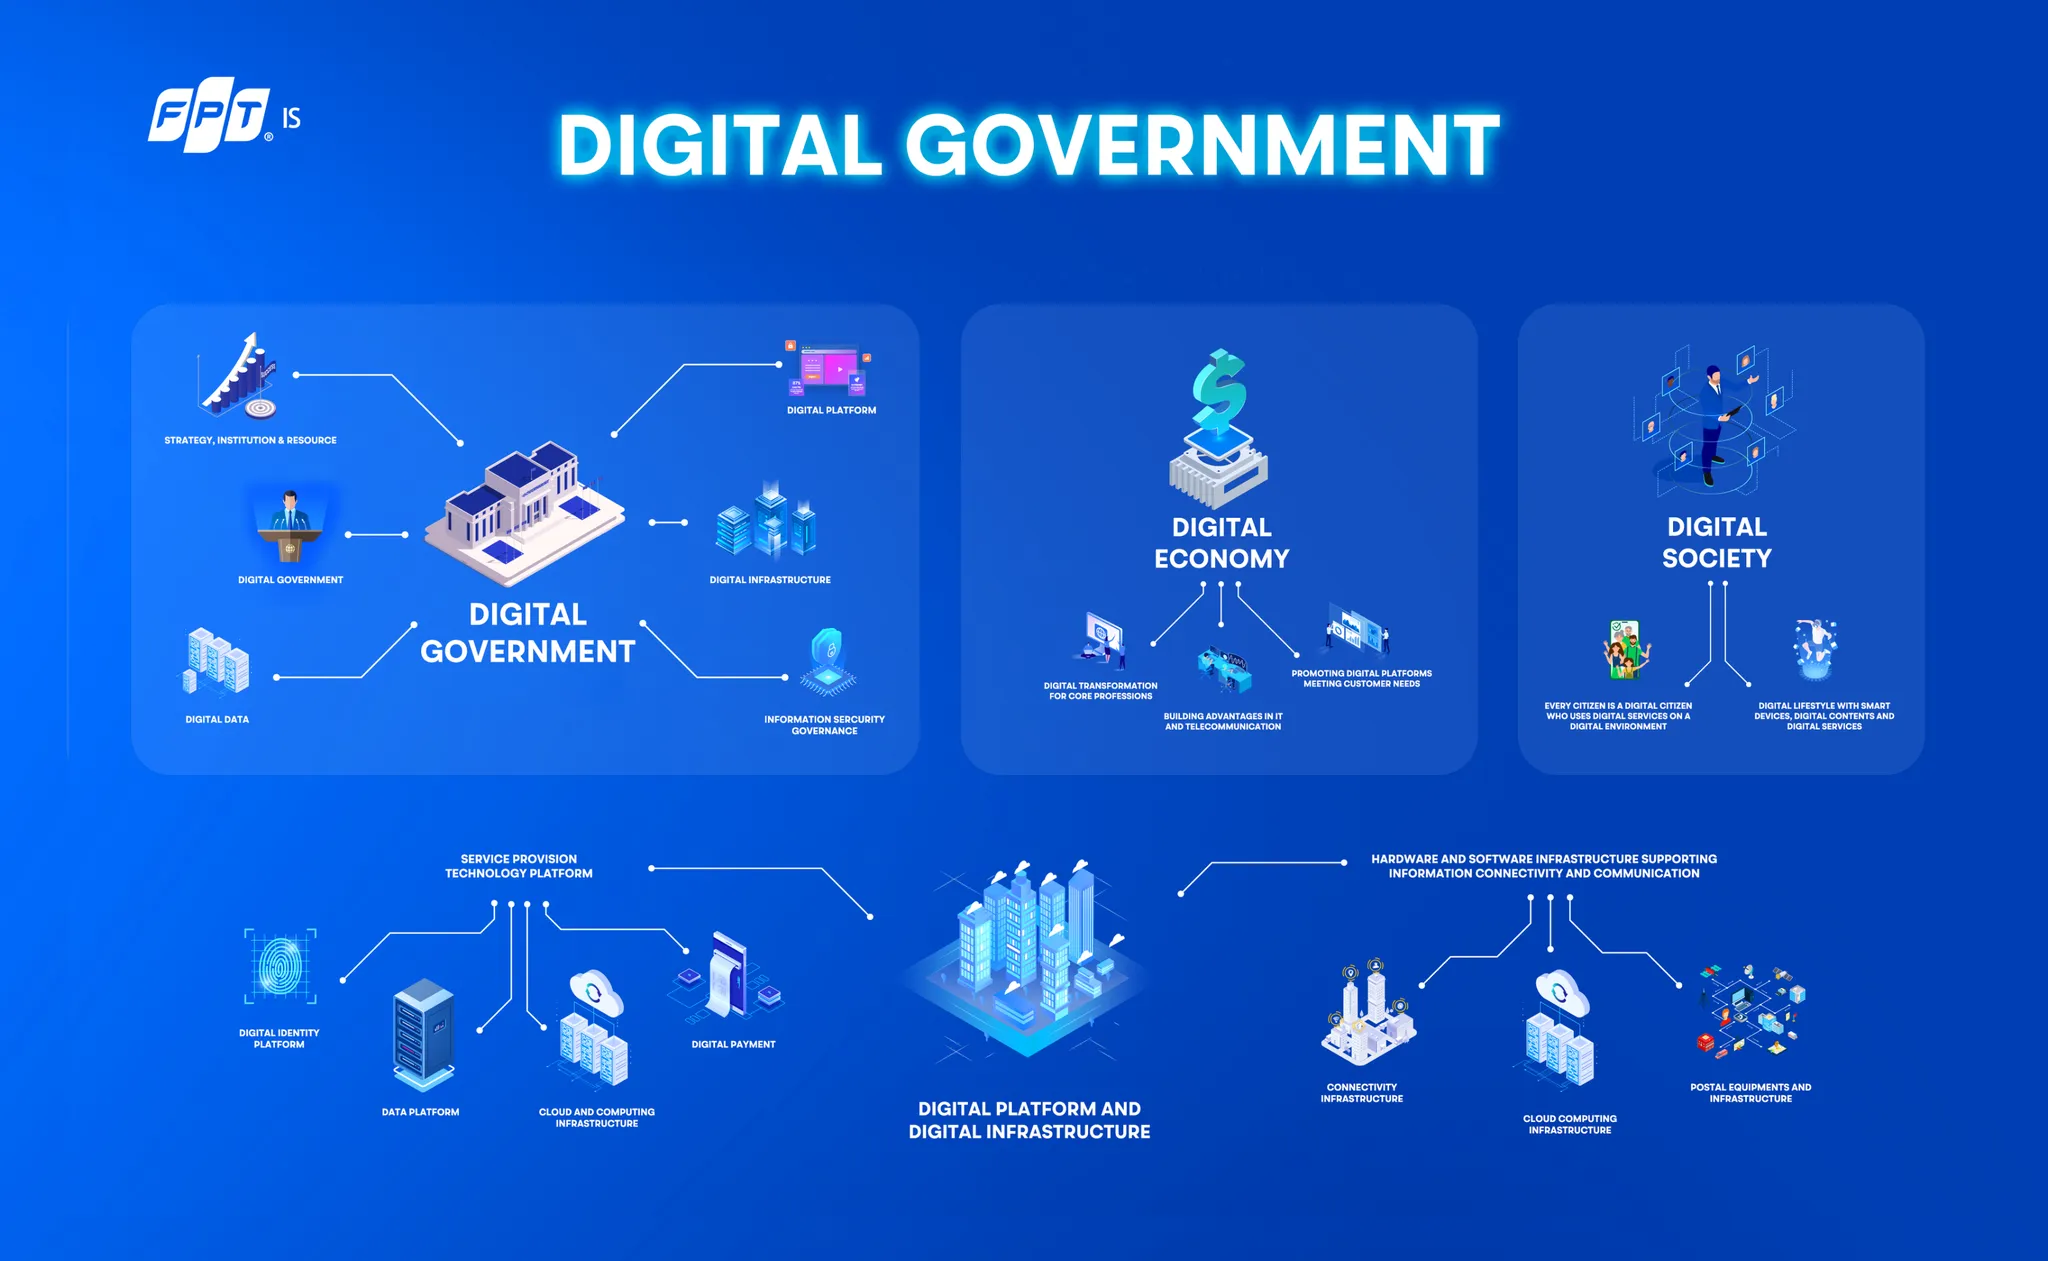 Digital government with FPT